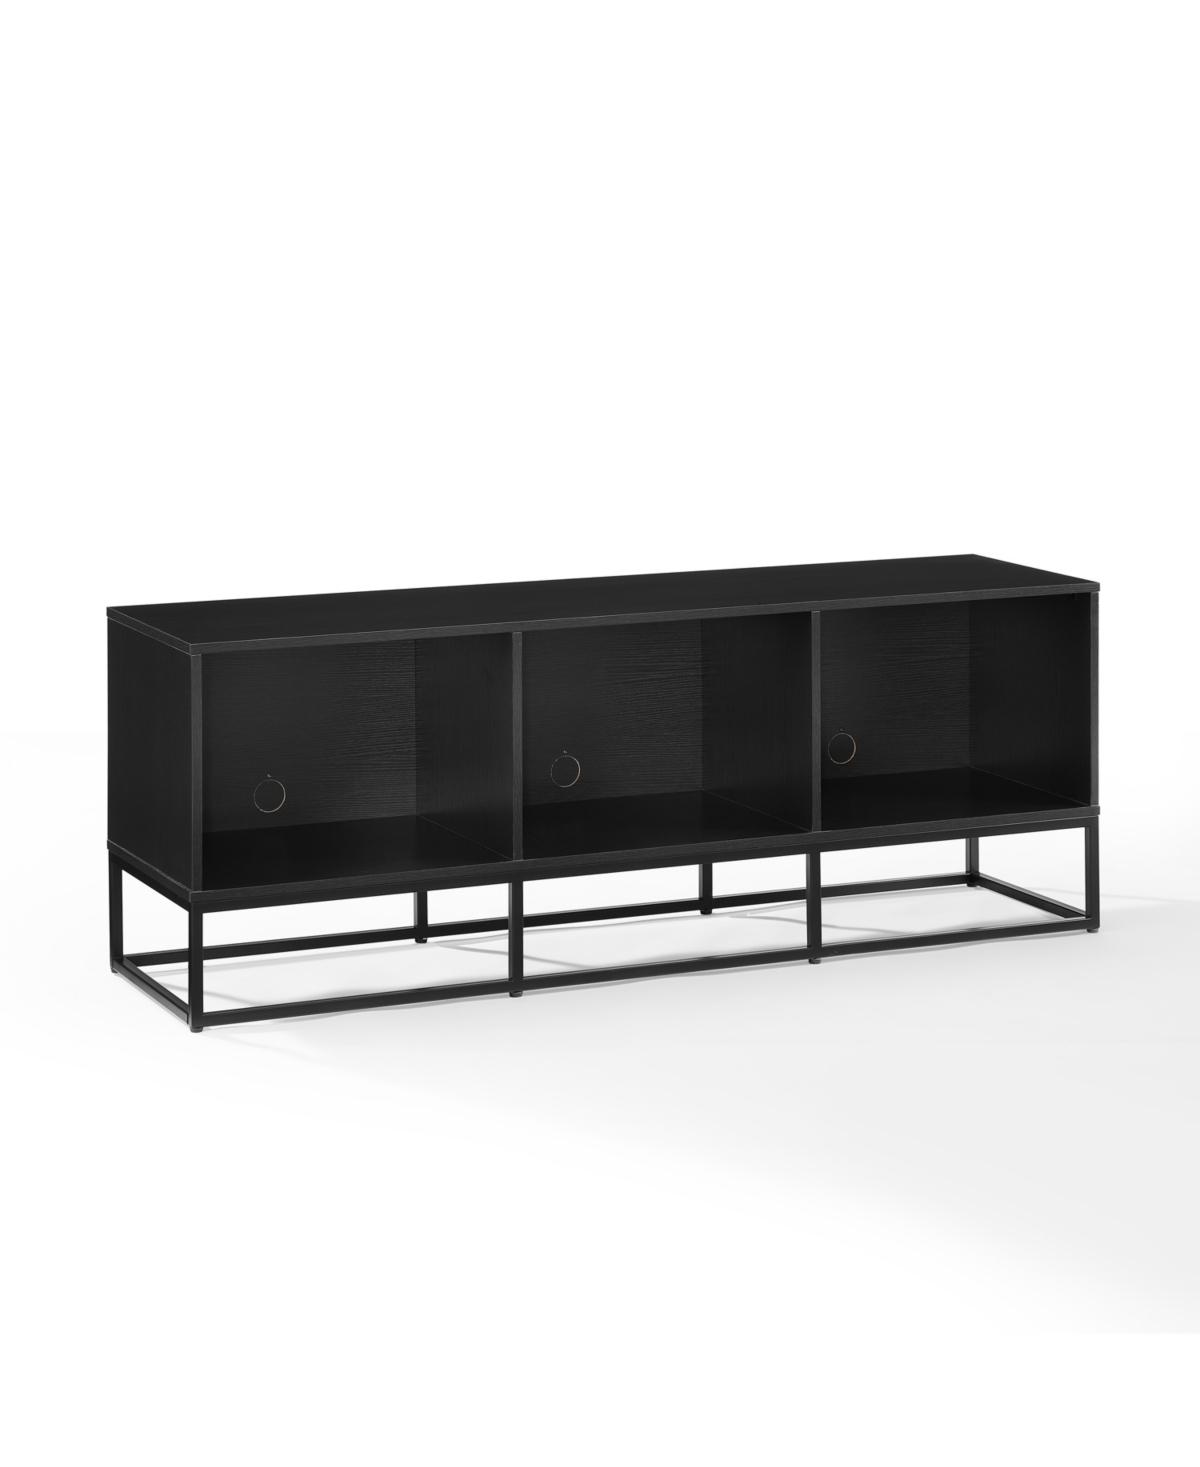 Crosley Enzo Large Mdf And Steel Record Storage Media Console In Black